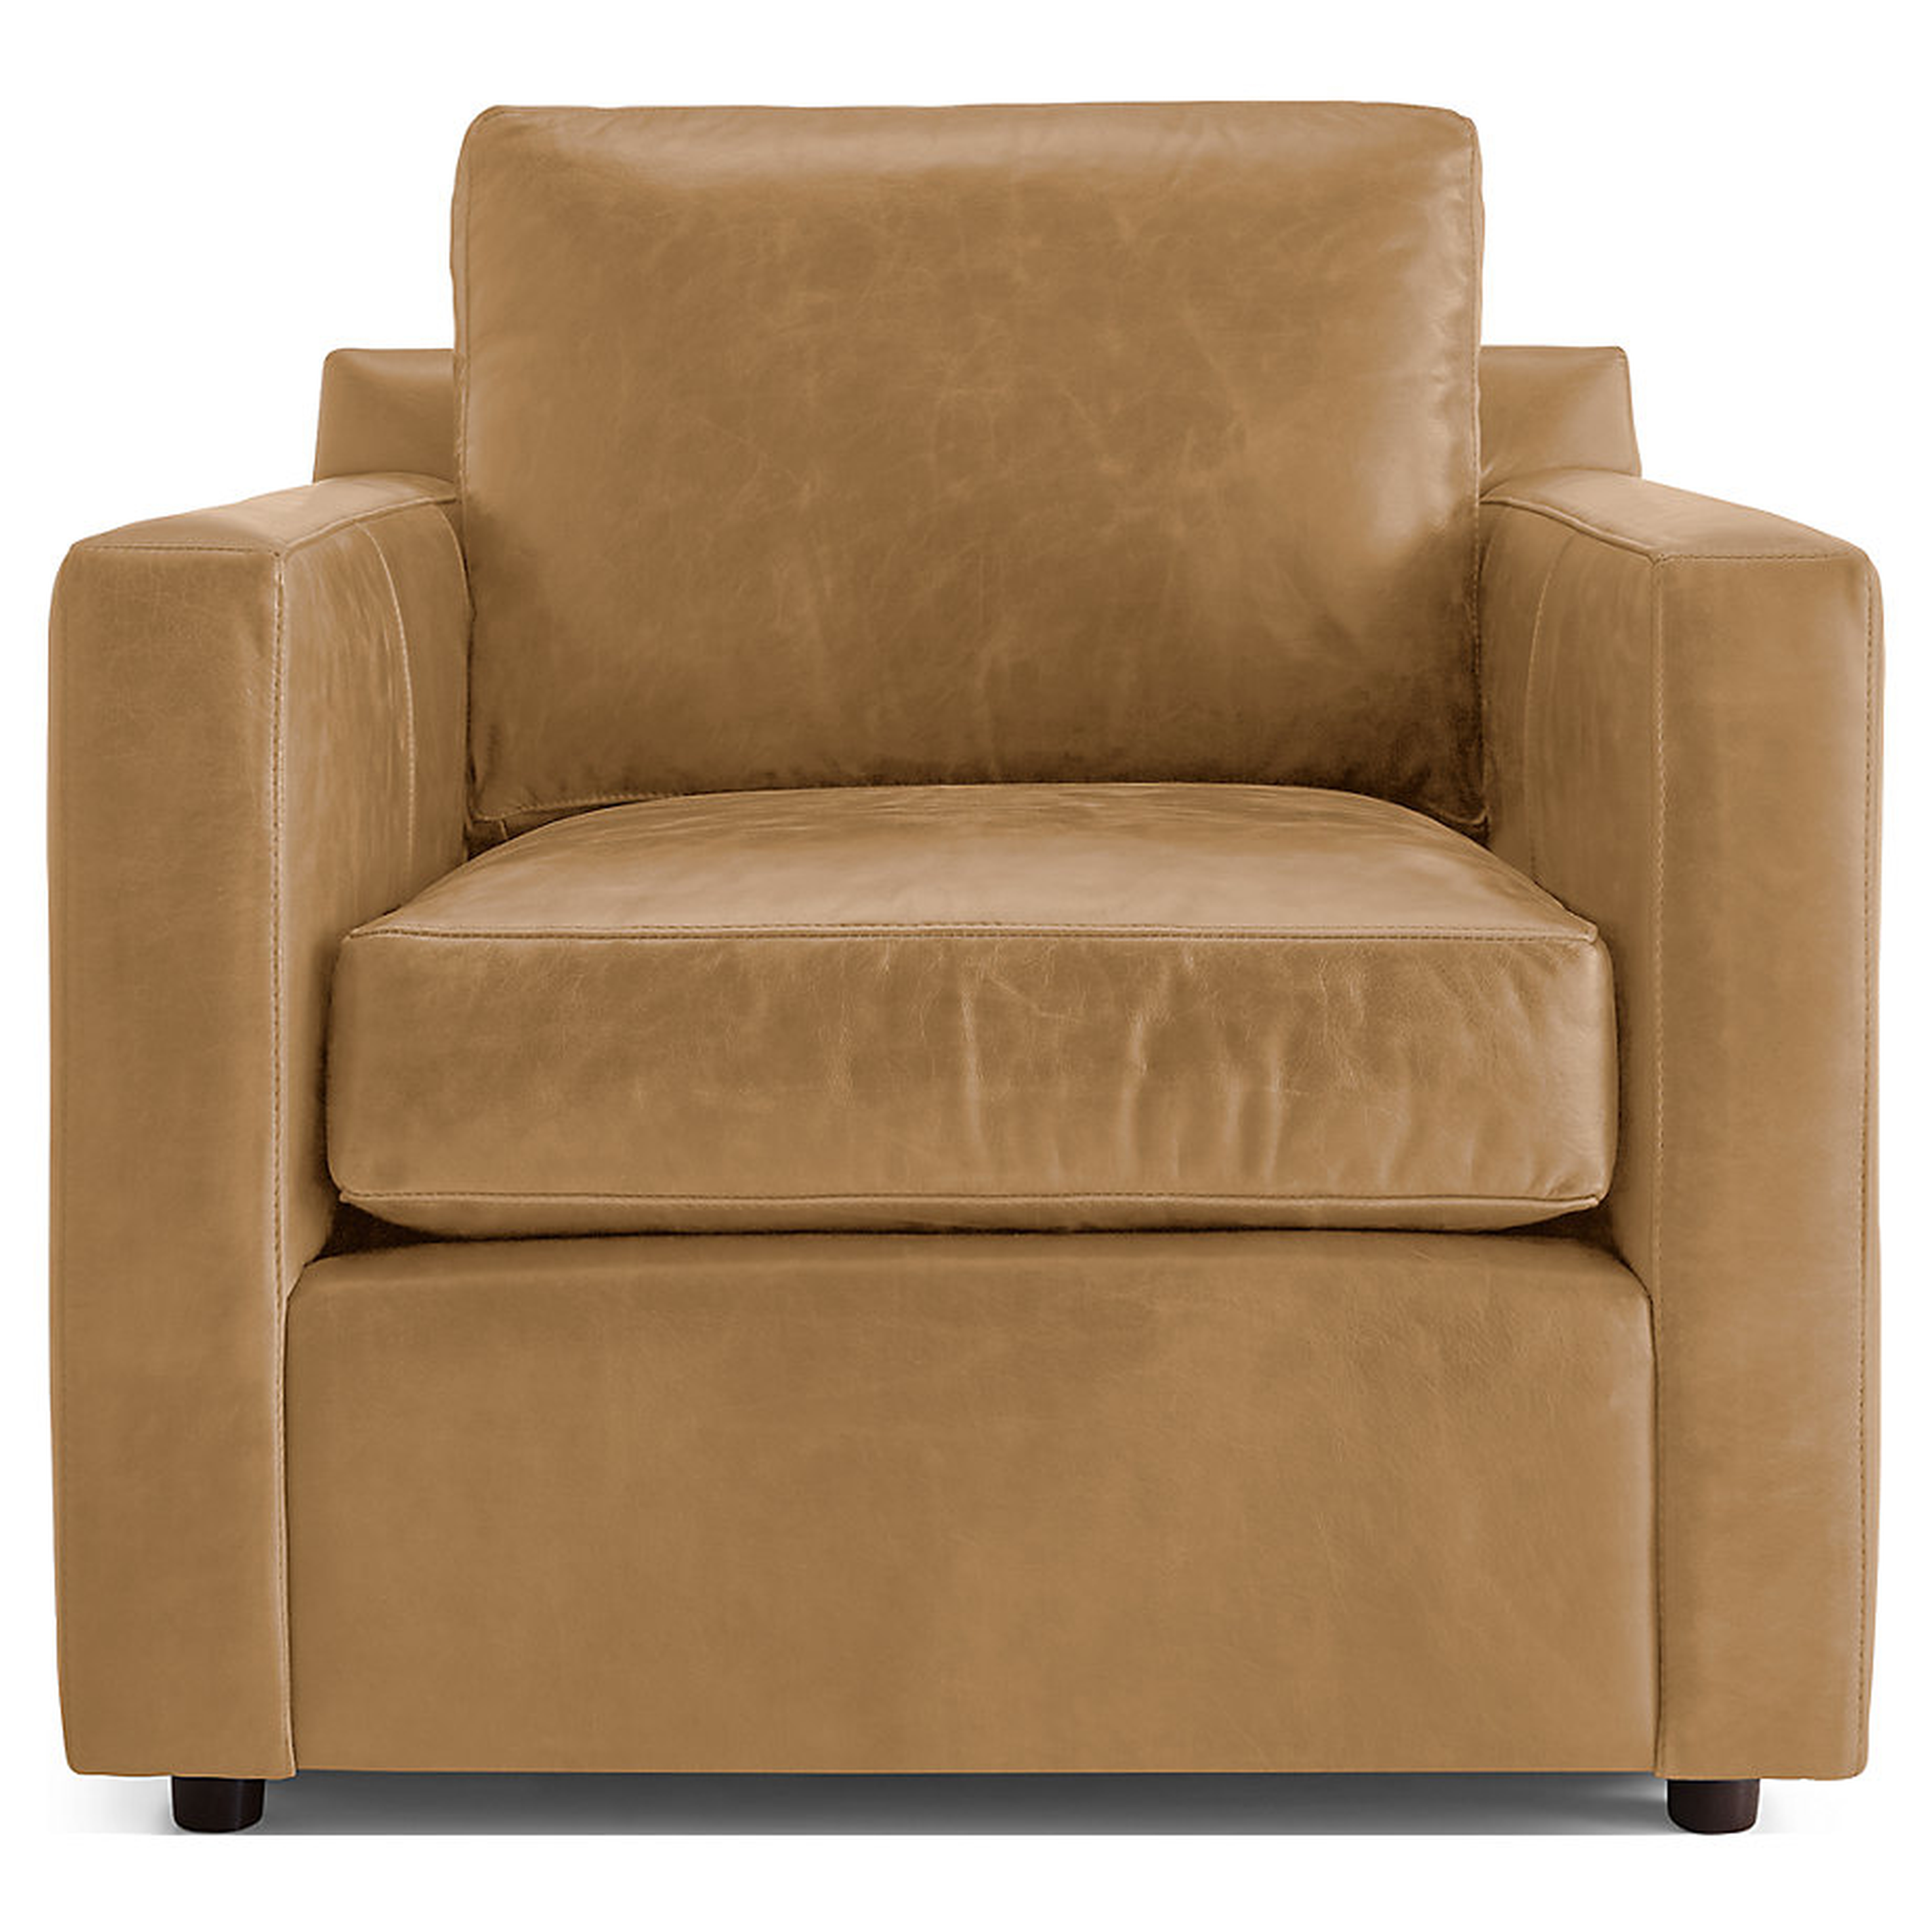 Barrett Leather Track Arm Chair - Crate and Barrel